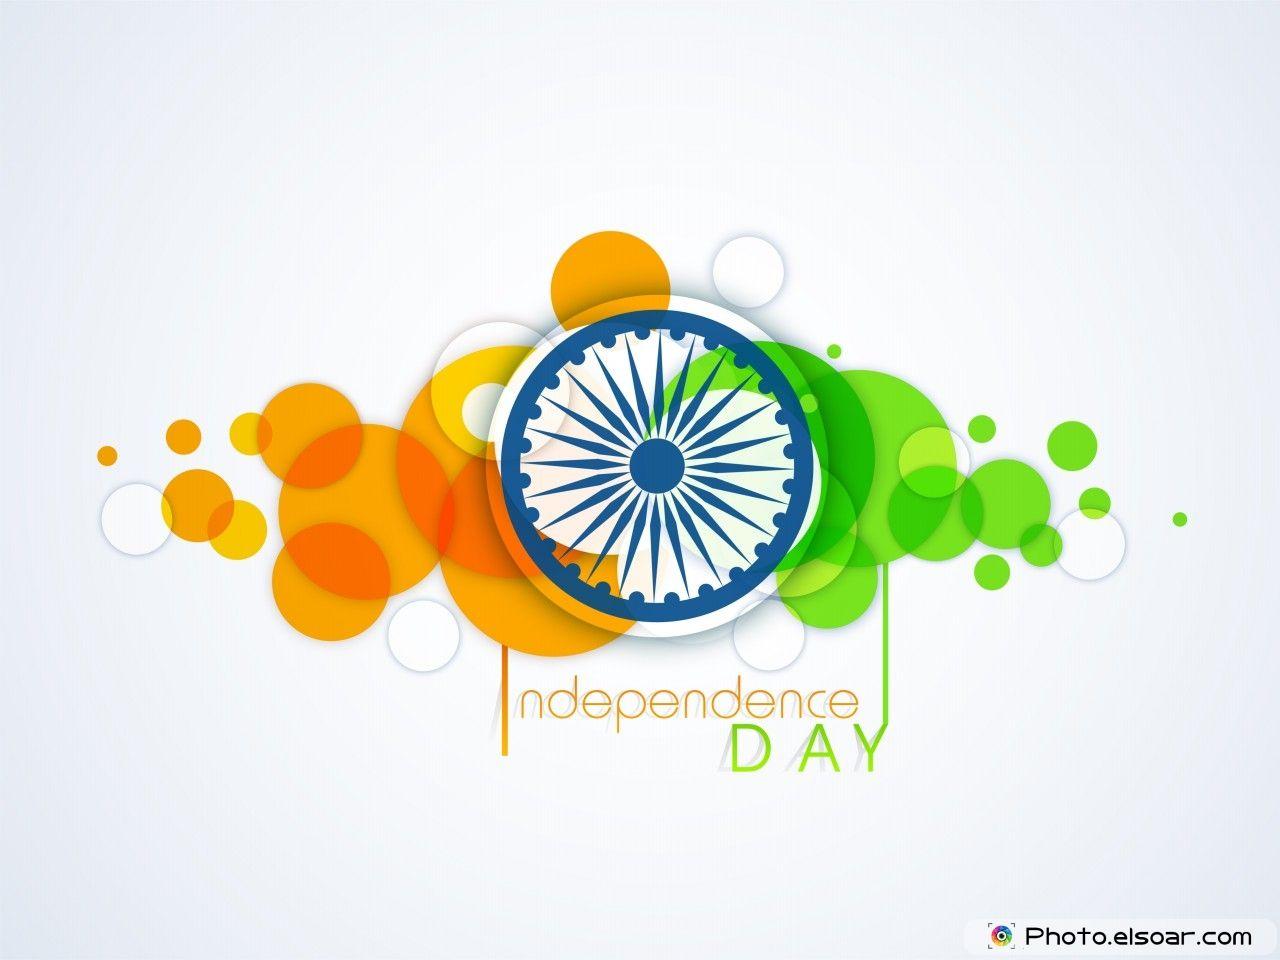 India Independence Day Wallpaper HD Picture August 1024×768 Independence Day Wallpaper 57 Wa. Independence day image, Happy independence day, Happy 15 august